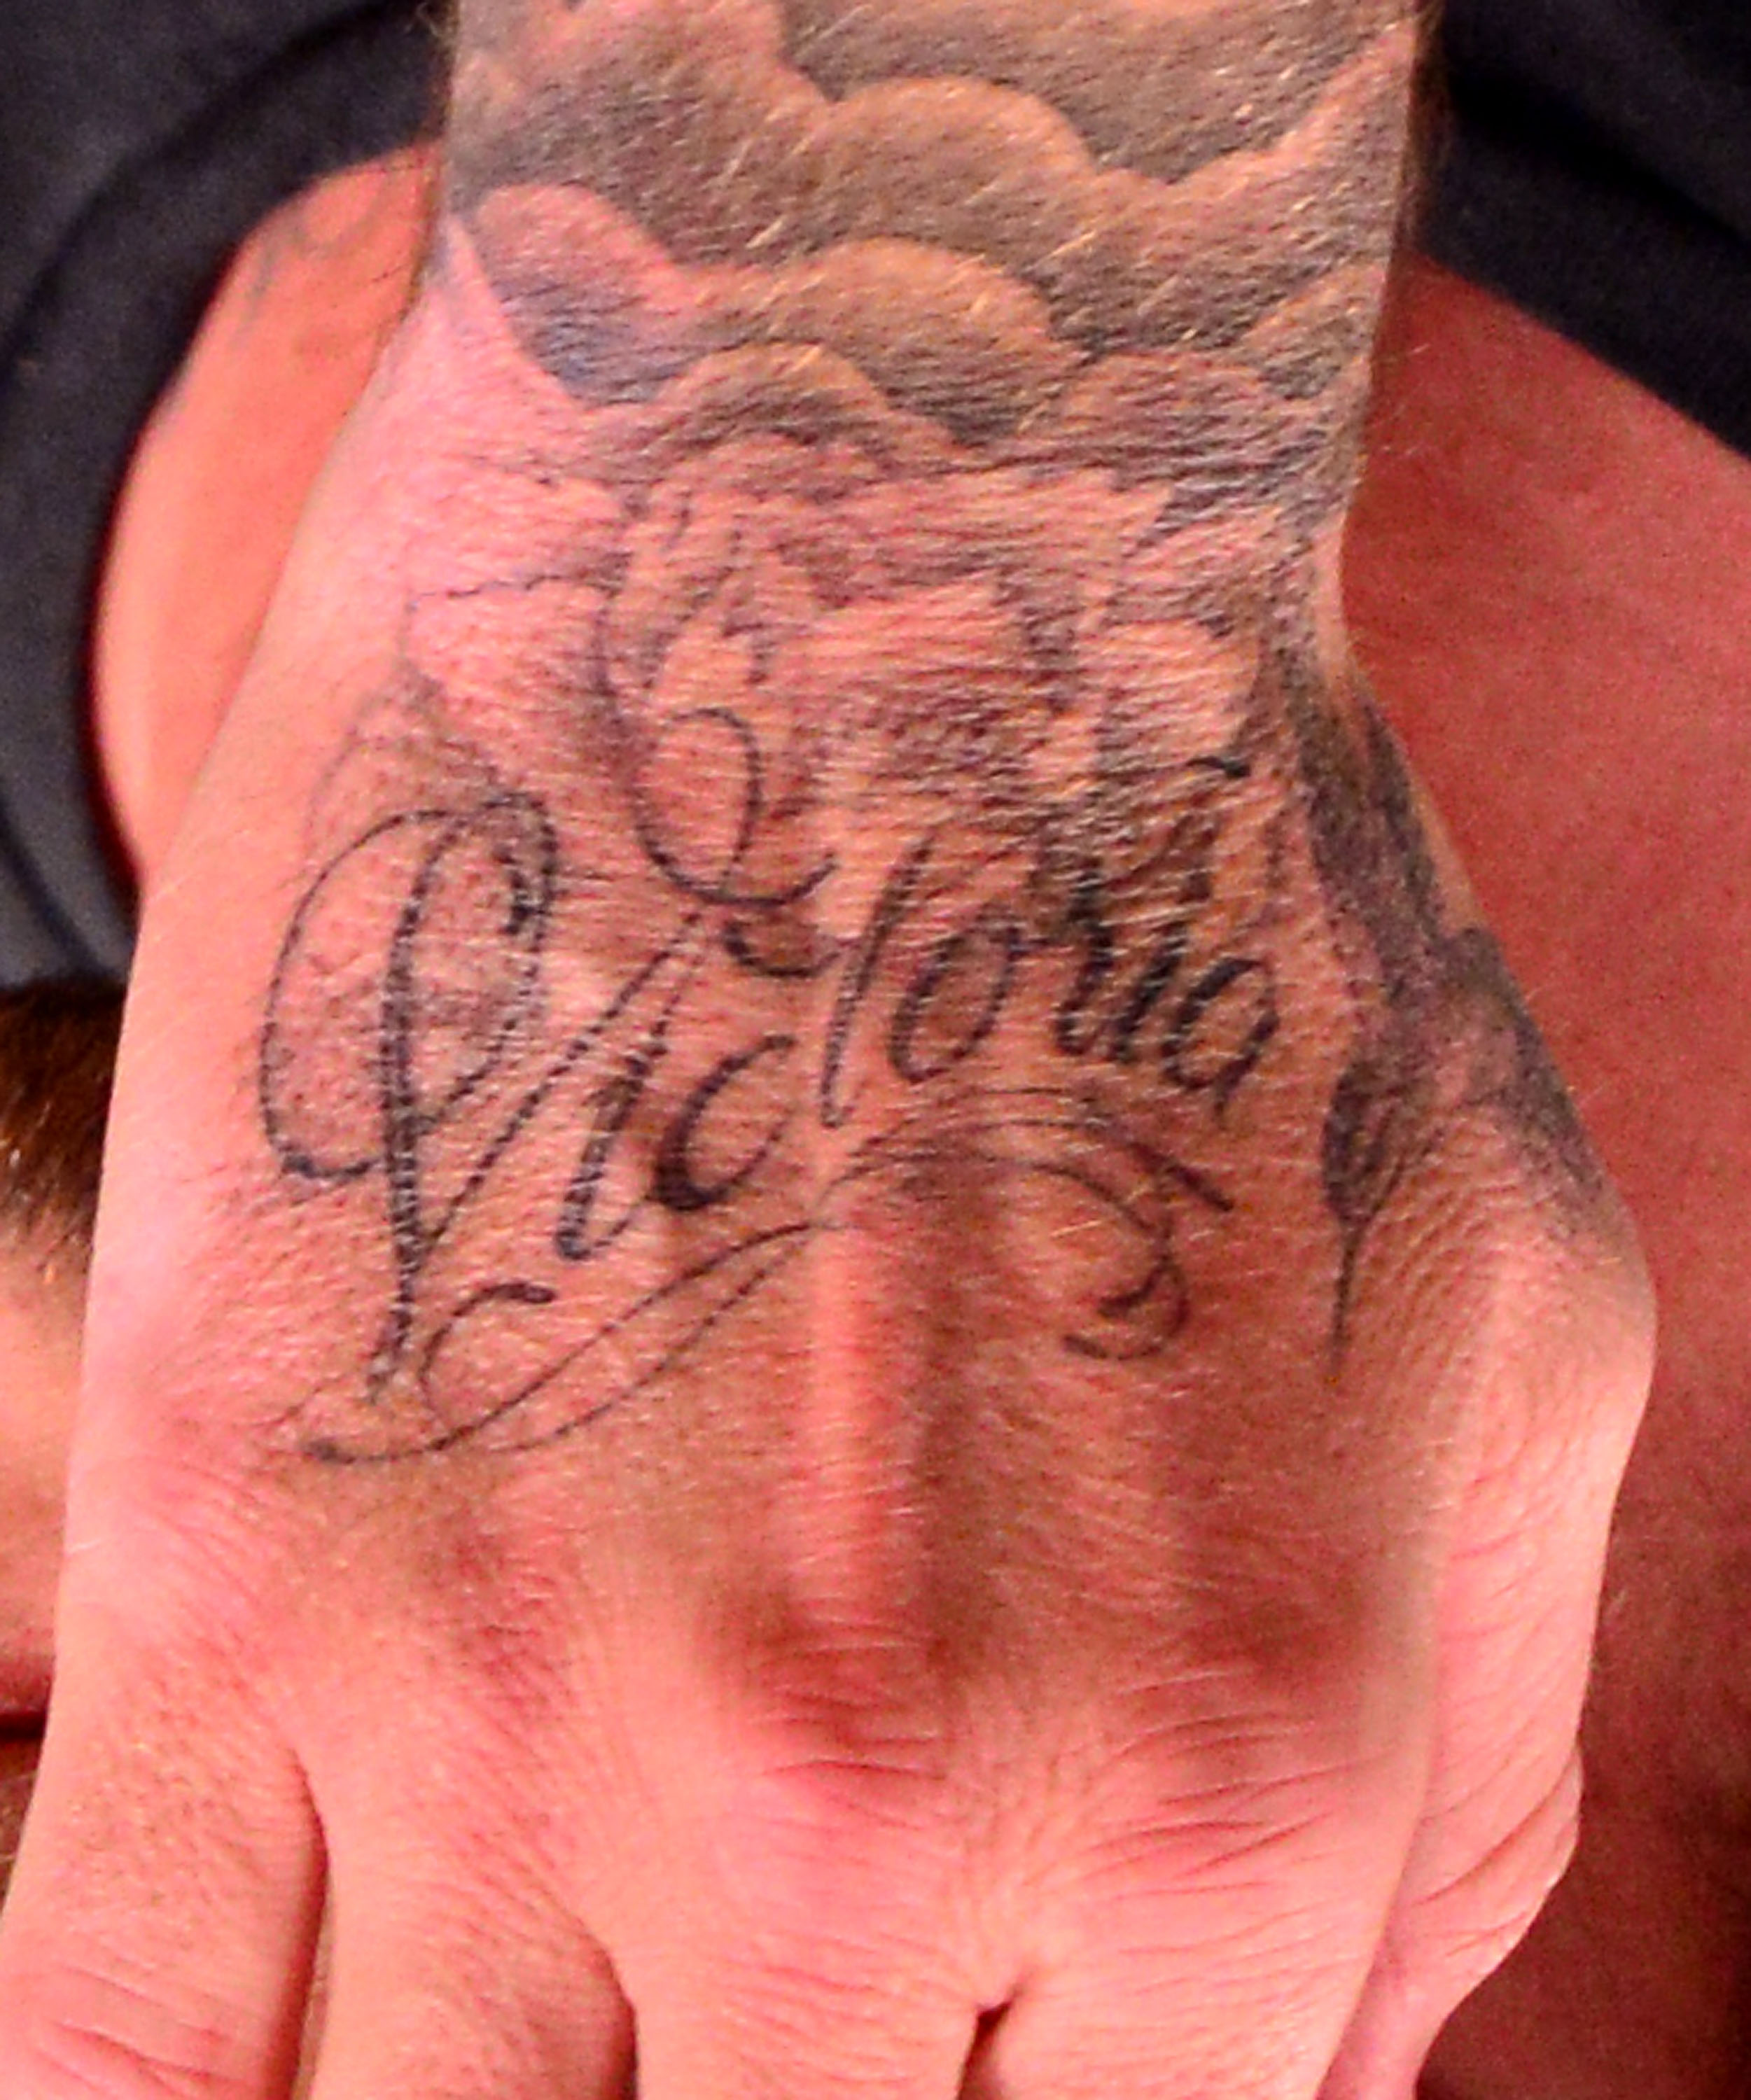 David Beckham's tattoo of Victoria Beckham's name seen on November 1, 2013 in New York City | Source: Getty Images